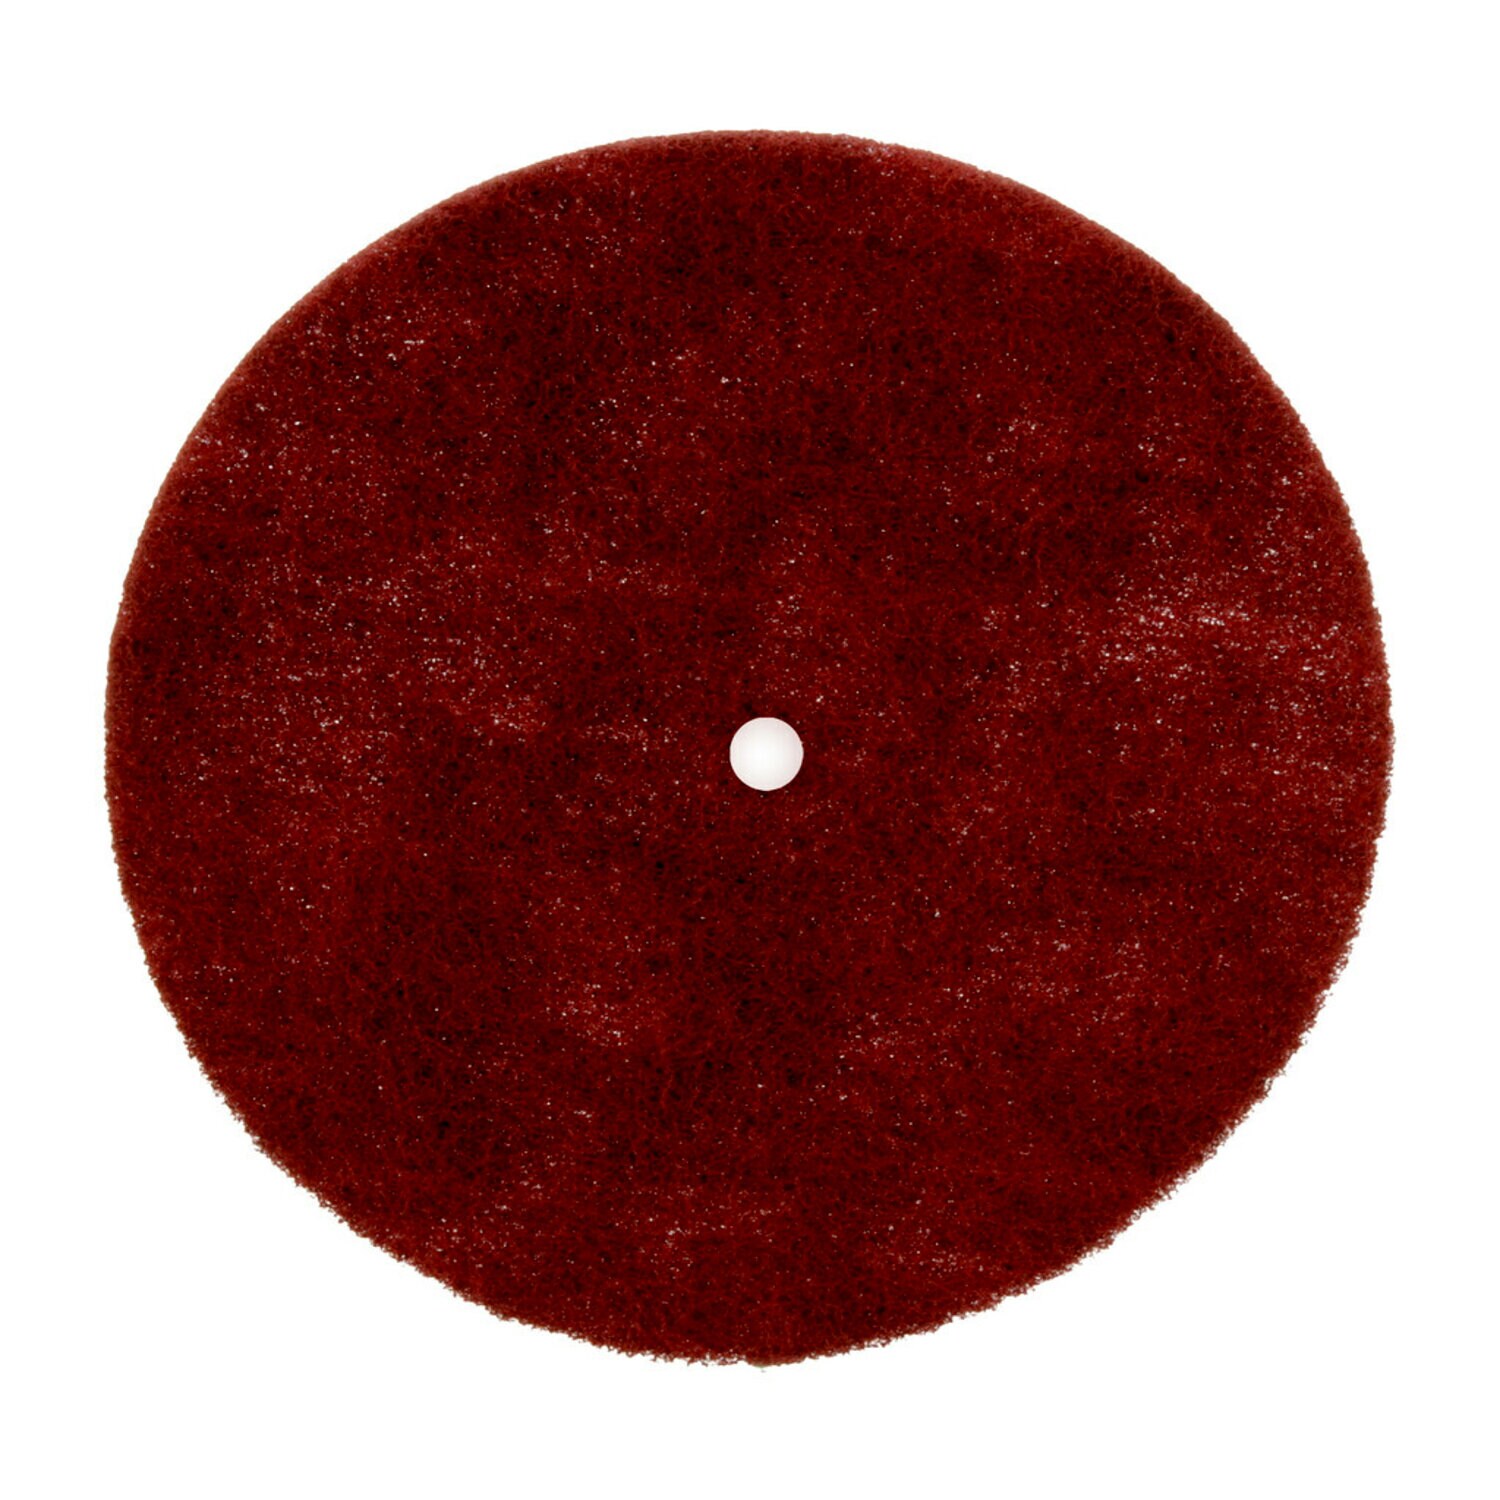 7010368542 - Standard Abrasives Buff and Blend HS Disc, 869908, 8 in x 1-1/4 in A
VFN, 5/Pac, 50 ea/Case